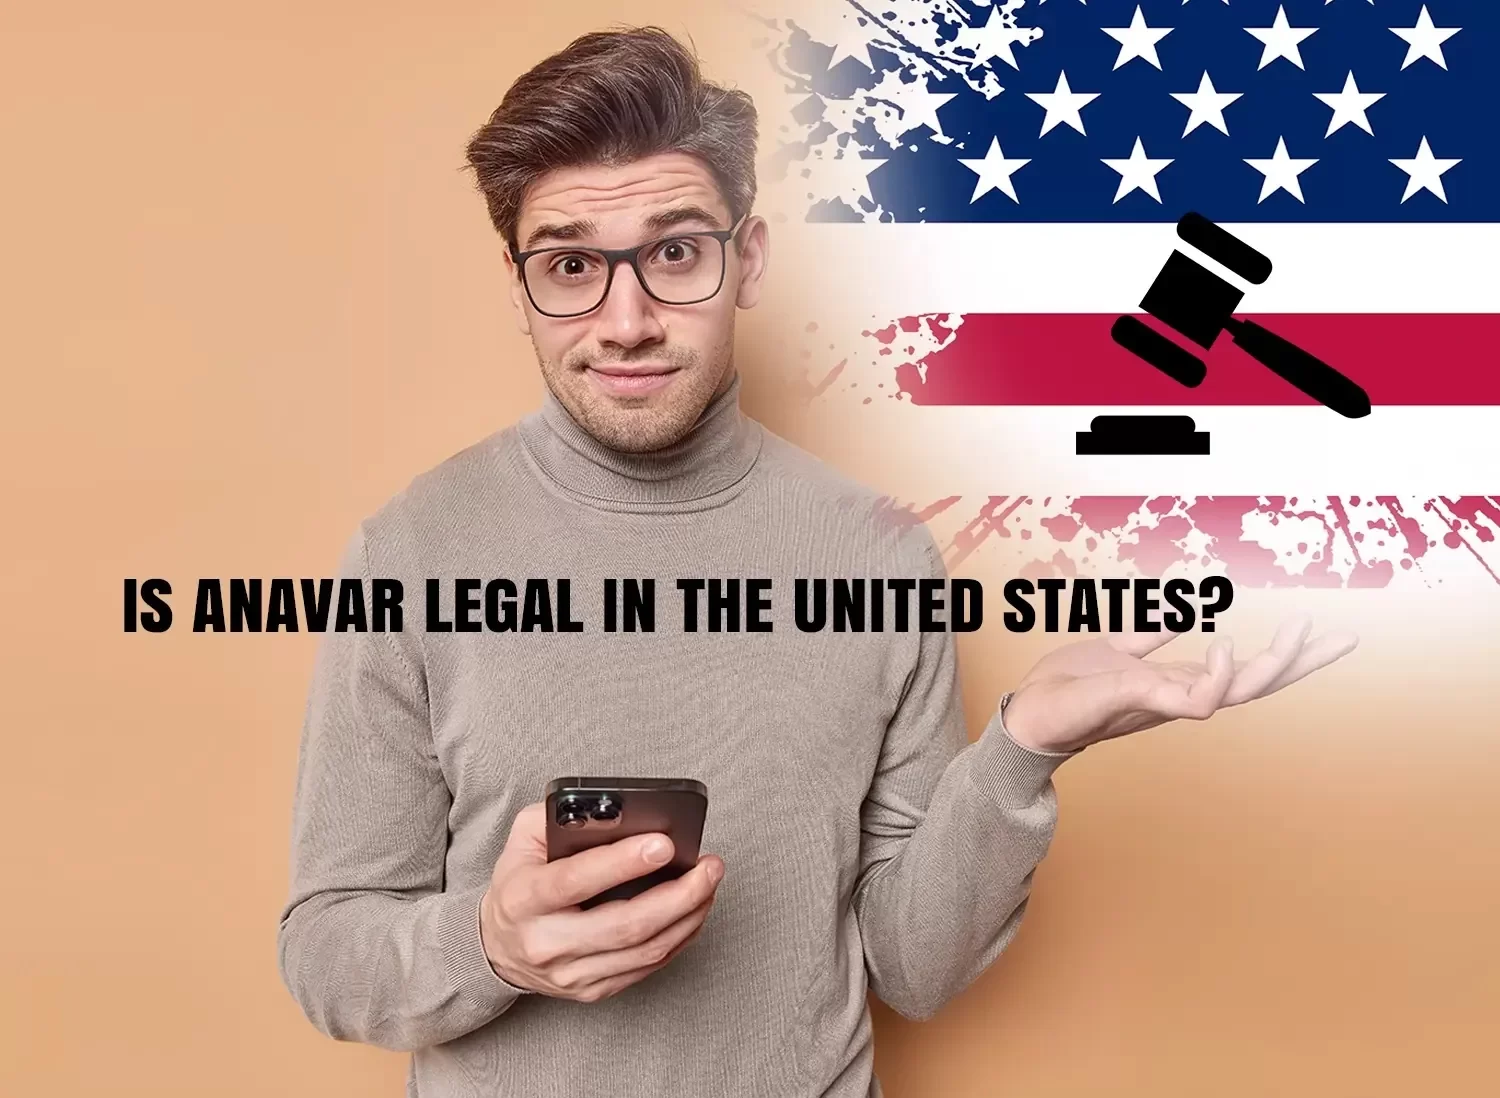 Anavar legality in United States